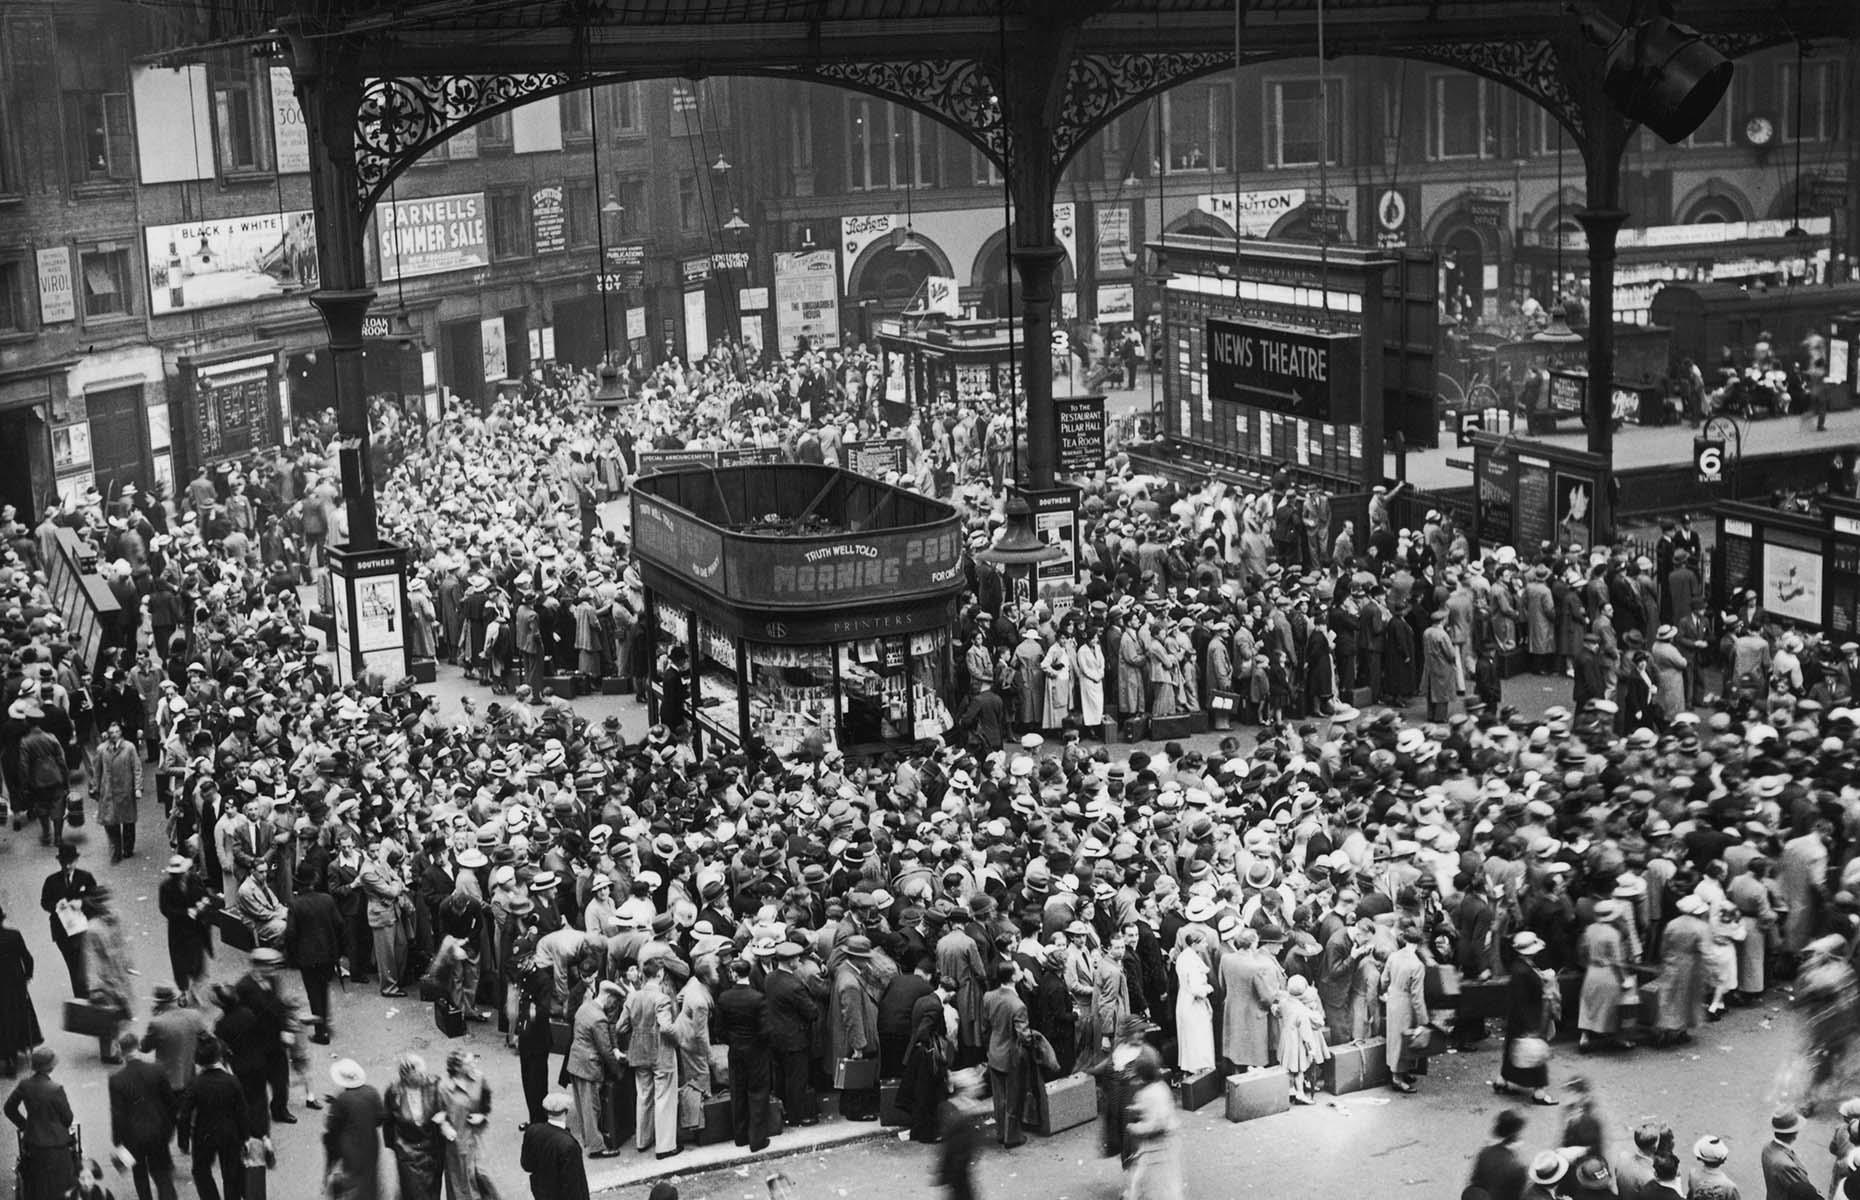 This snap of busy Victoria Station in 1936 bears a lot of resemblance to the vacation rush train travelers experience these days. With a wealth of train companies, ferrying passengers to nearly every corner of the UK, more people were able to afford tickets and by the 1920s and 1930s it was no longer a luxury reserved just for the wealthy. Many families enjoyed Bank Holidays by the beach, foreign visitors were able to discover more of the country and domestic travel to London also boomed.